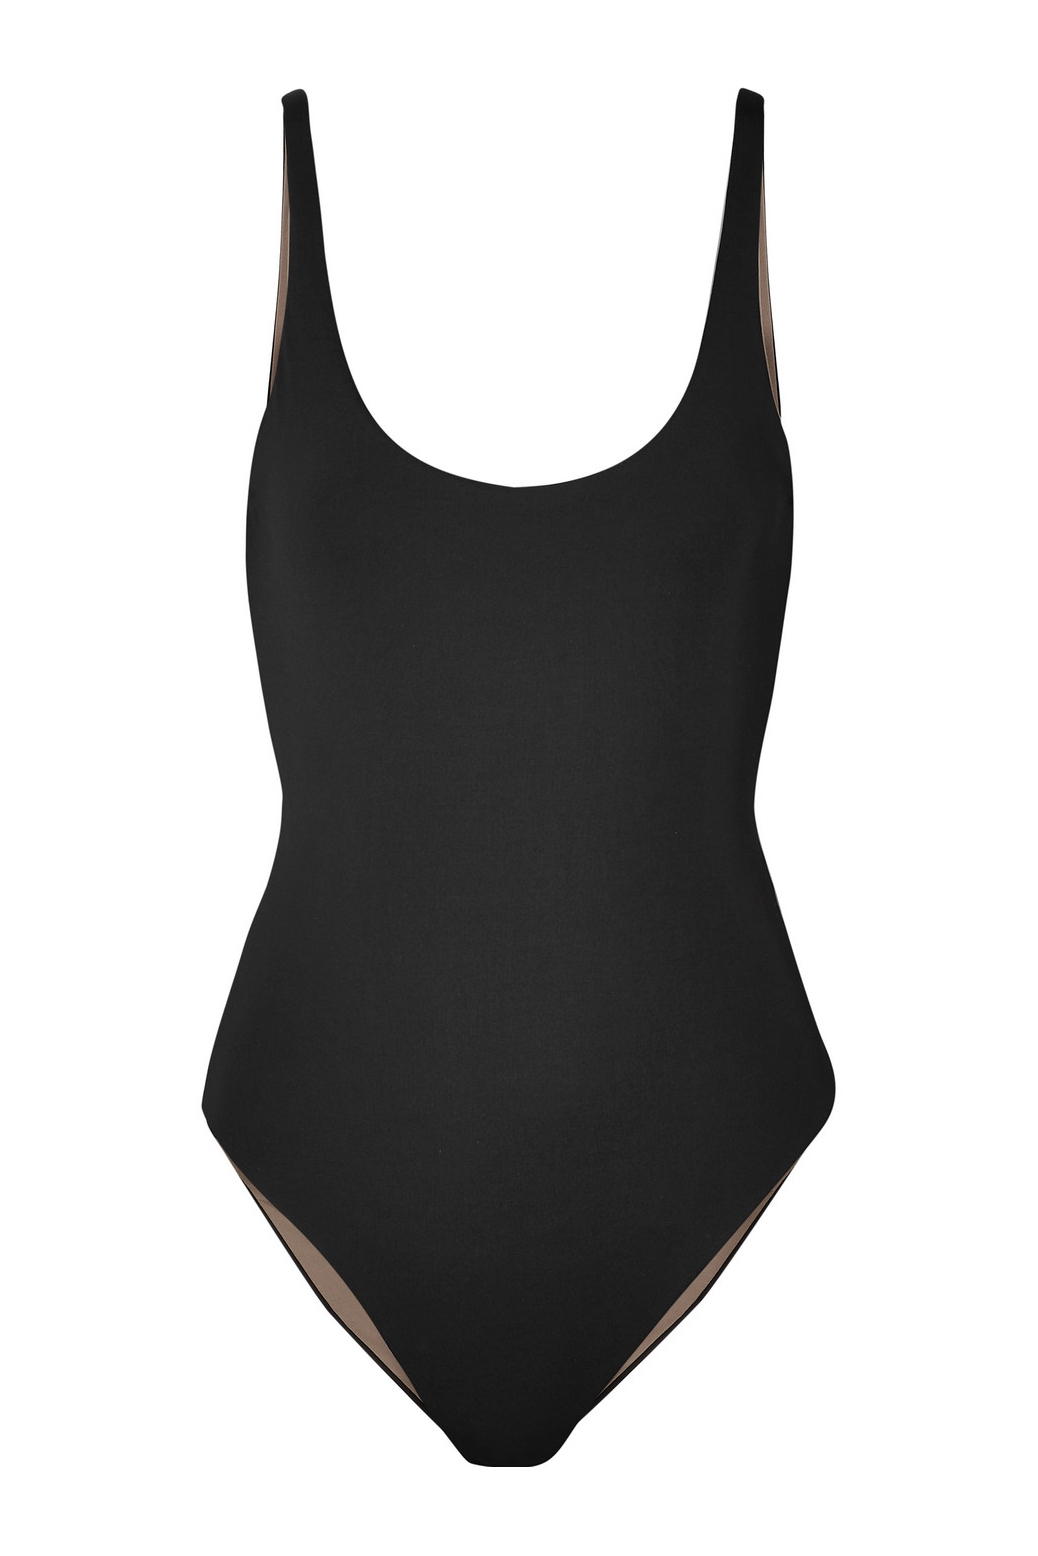 skin Chasing After Your Kids Has Never Looked Chicer: 15 One Piece Swimsuits for the Constantly Active Moms